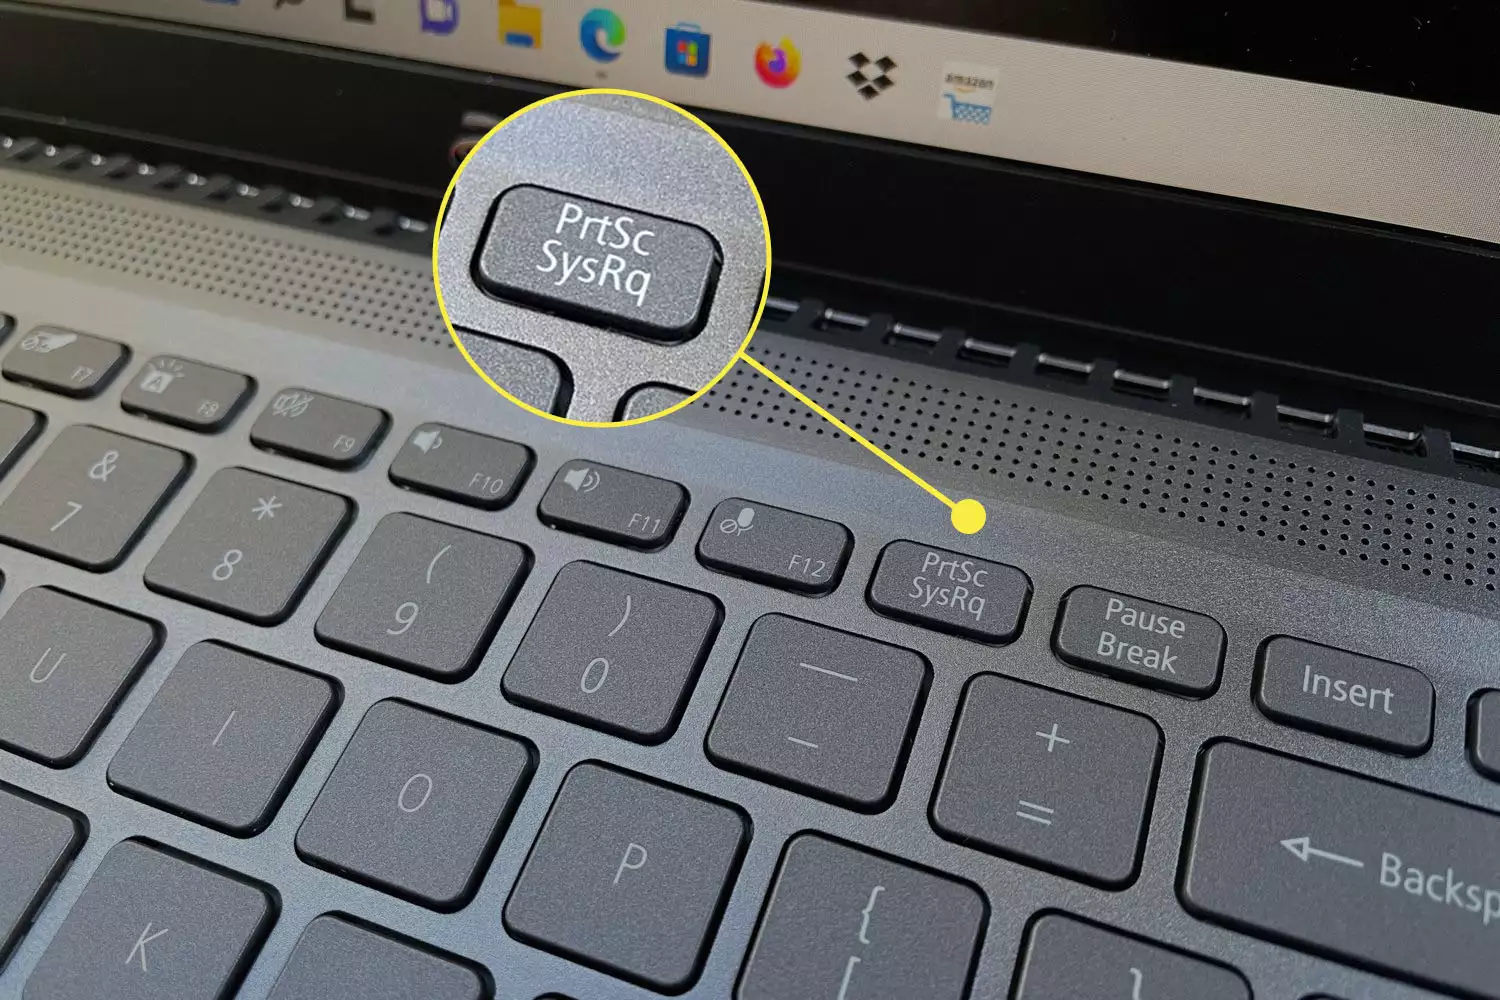 A screenshot of an Acer laptop and the Print Screen button highlighted.